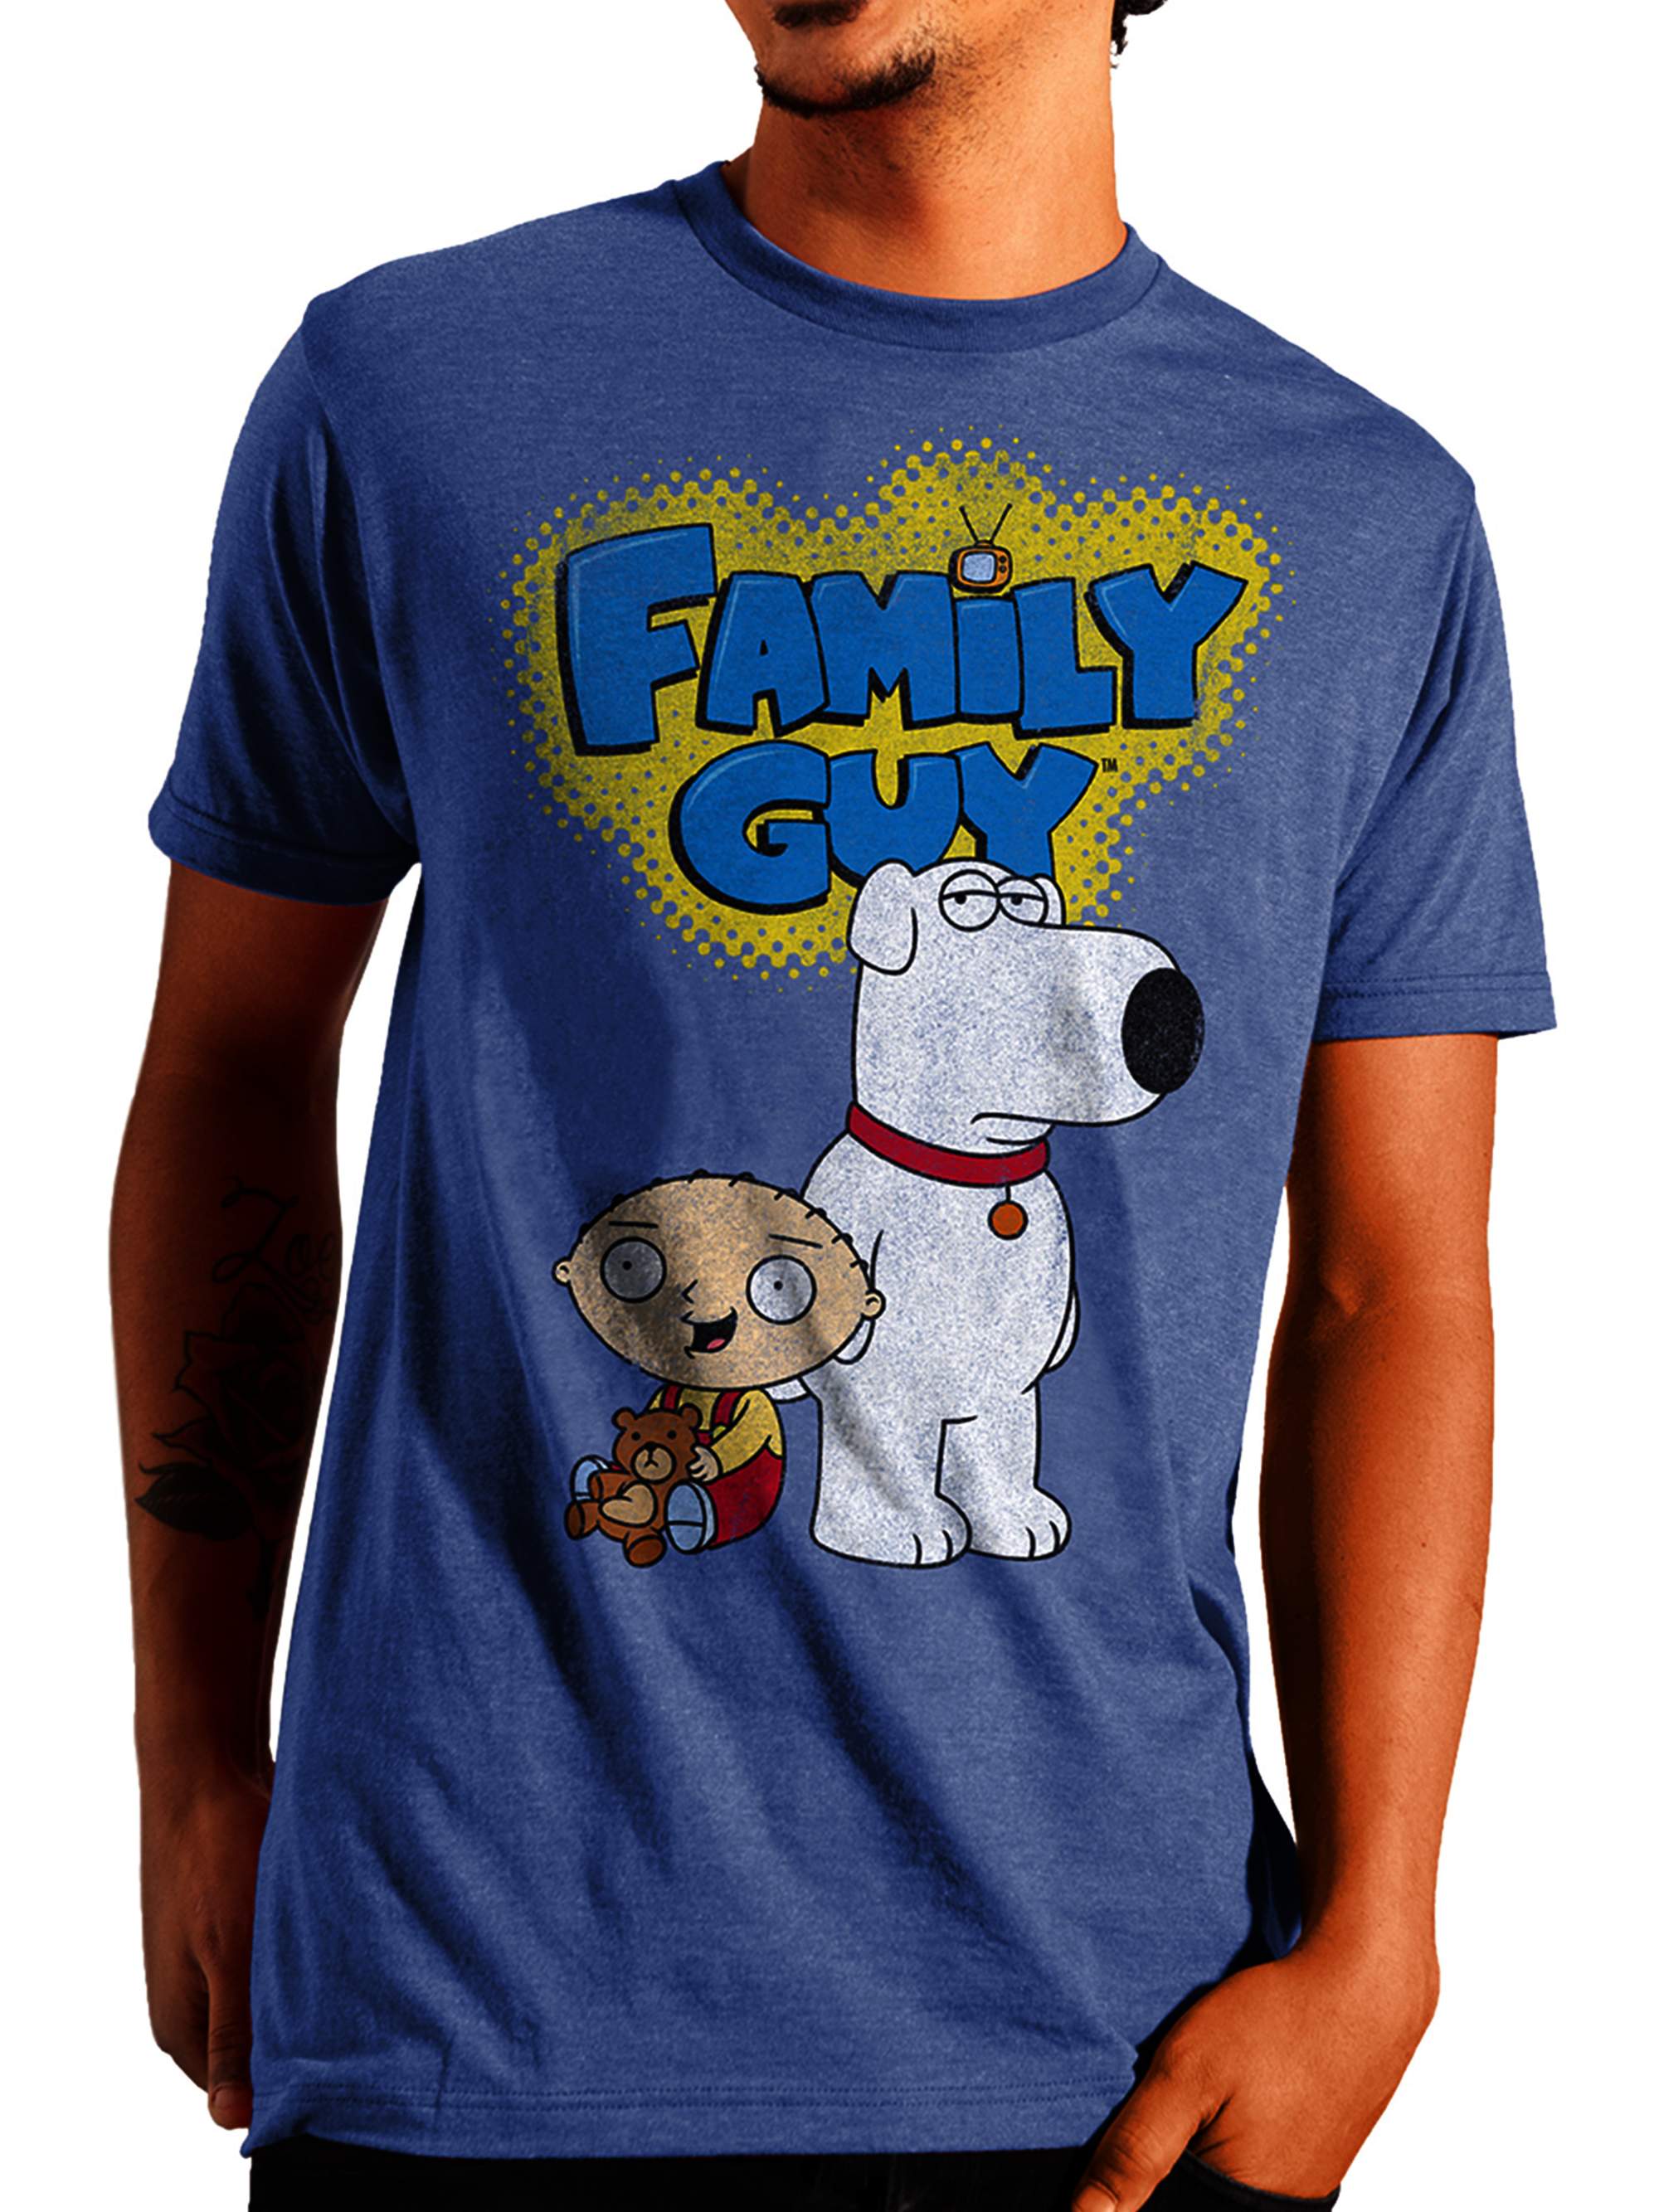 Family Guy Stewie and Brian Men's and Big Men's Graphic T-shirt - image 1 of 1